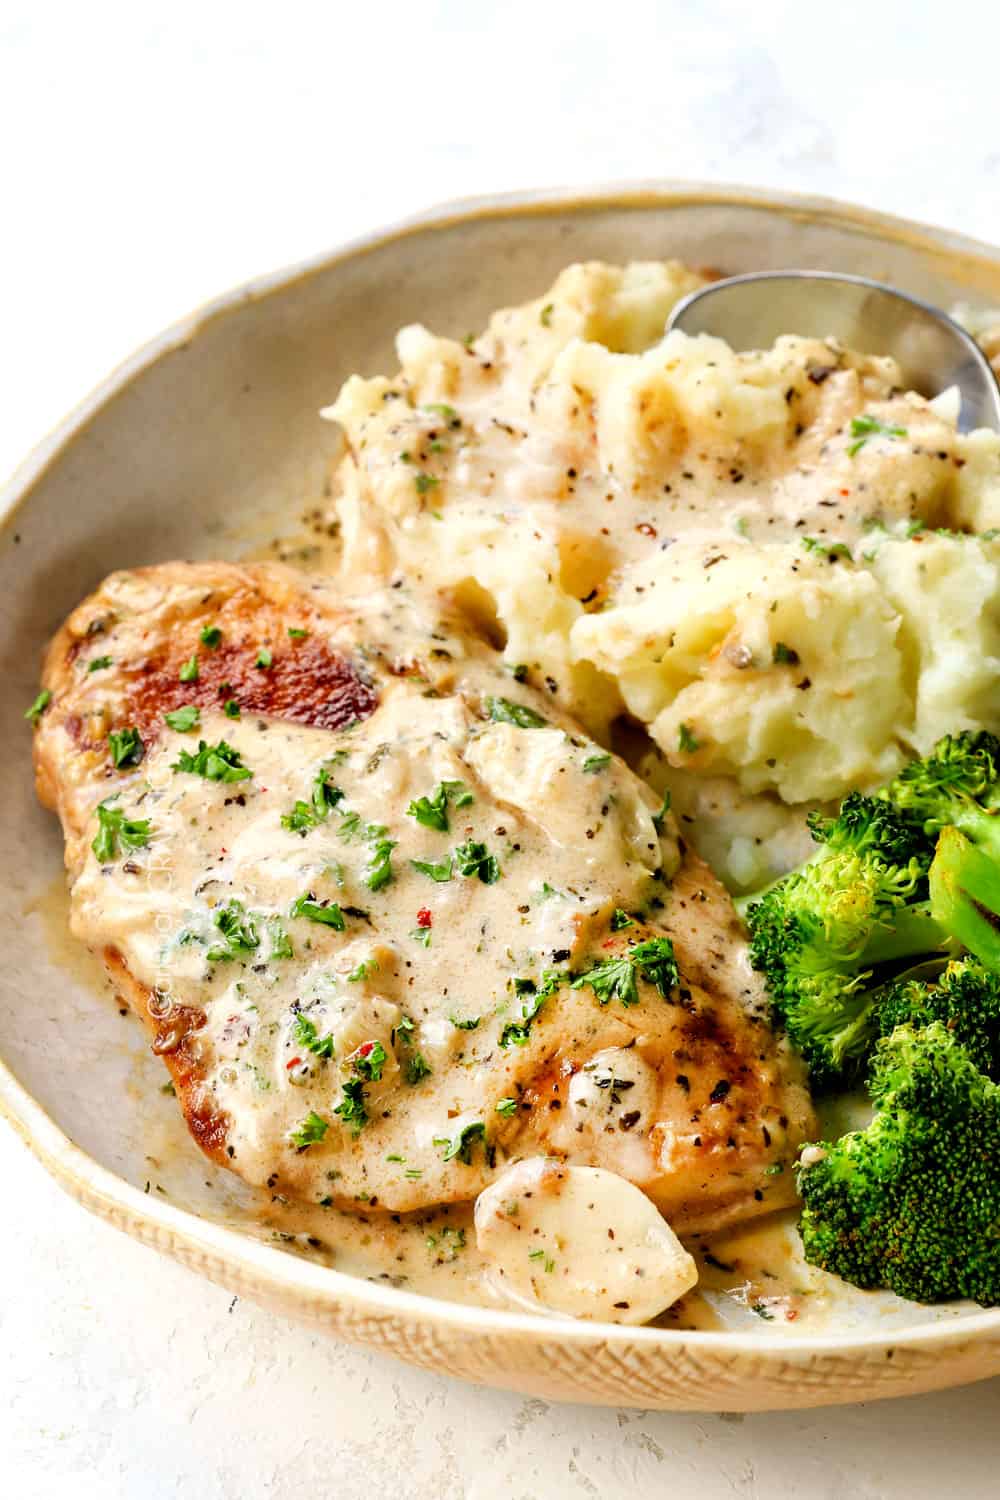 up close view of a piece of creamy garlic chicken with Parmesan sauce over top with mashed potatoes and broccoli on the side